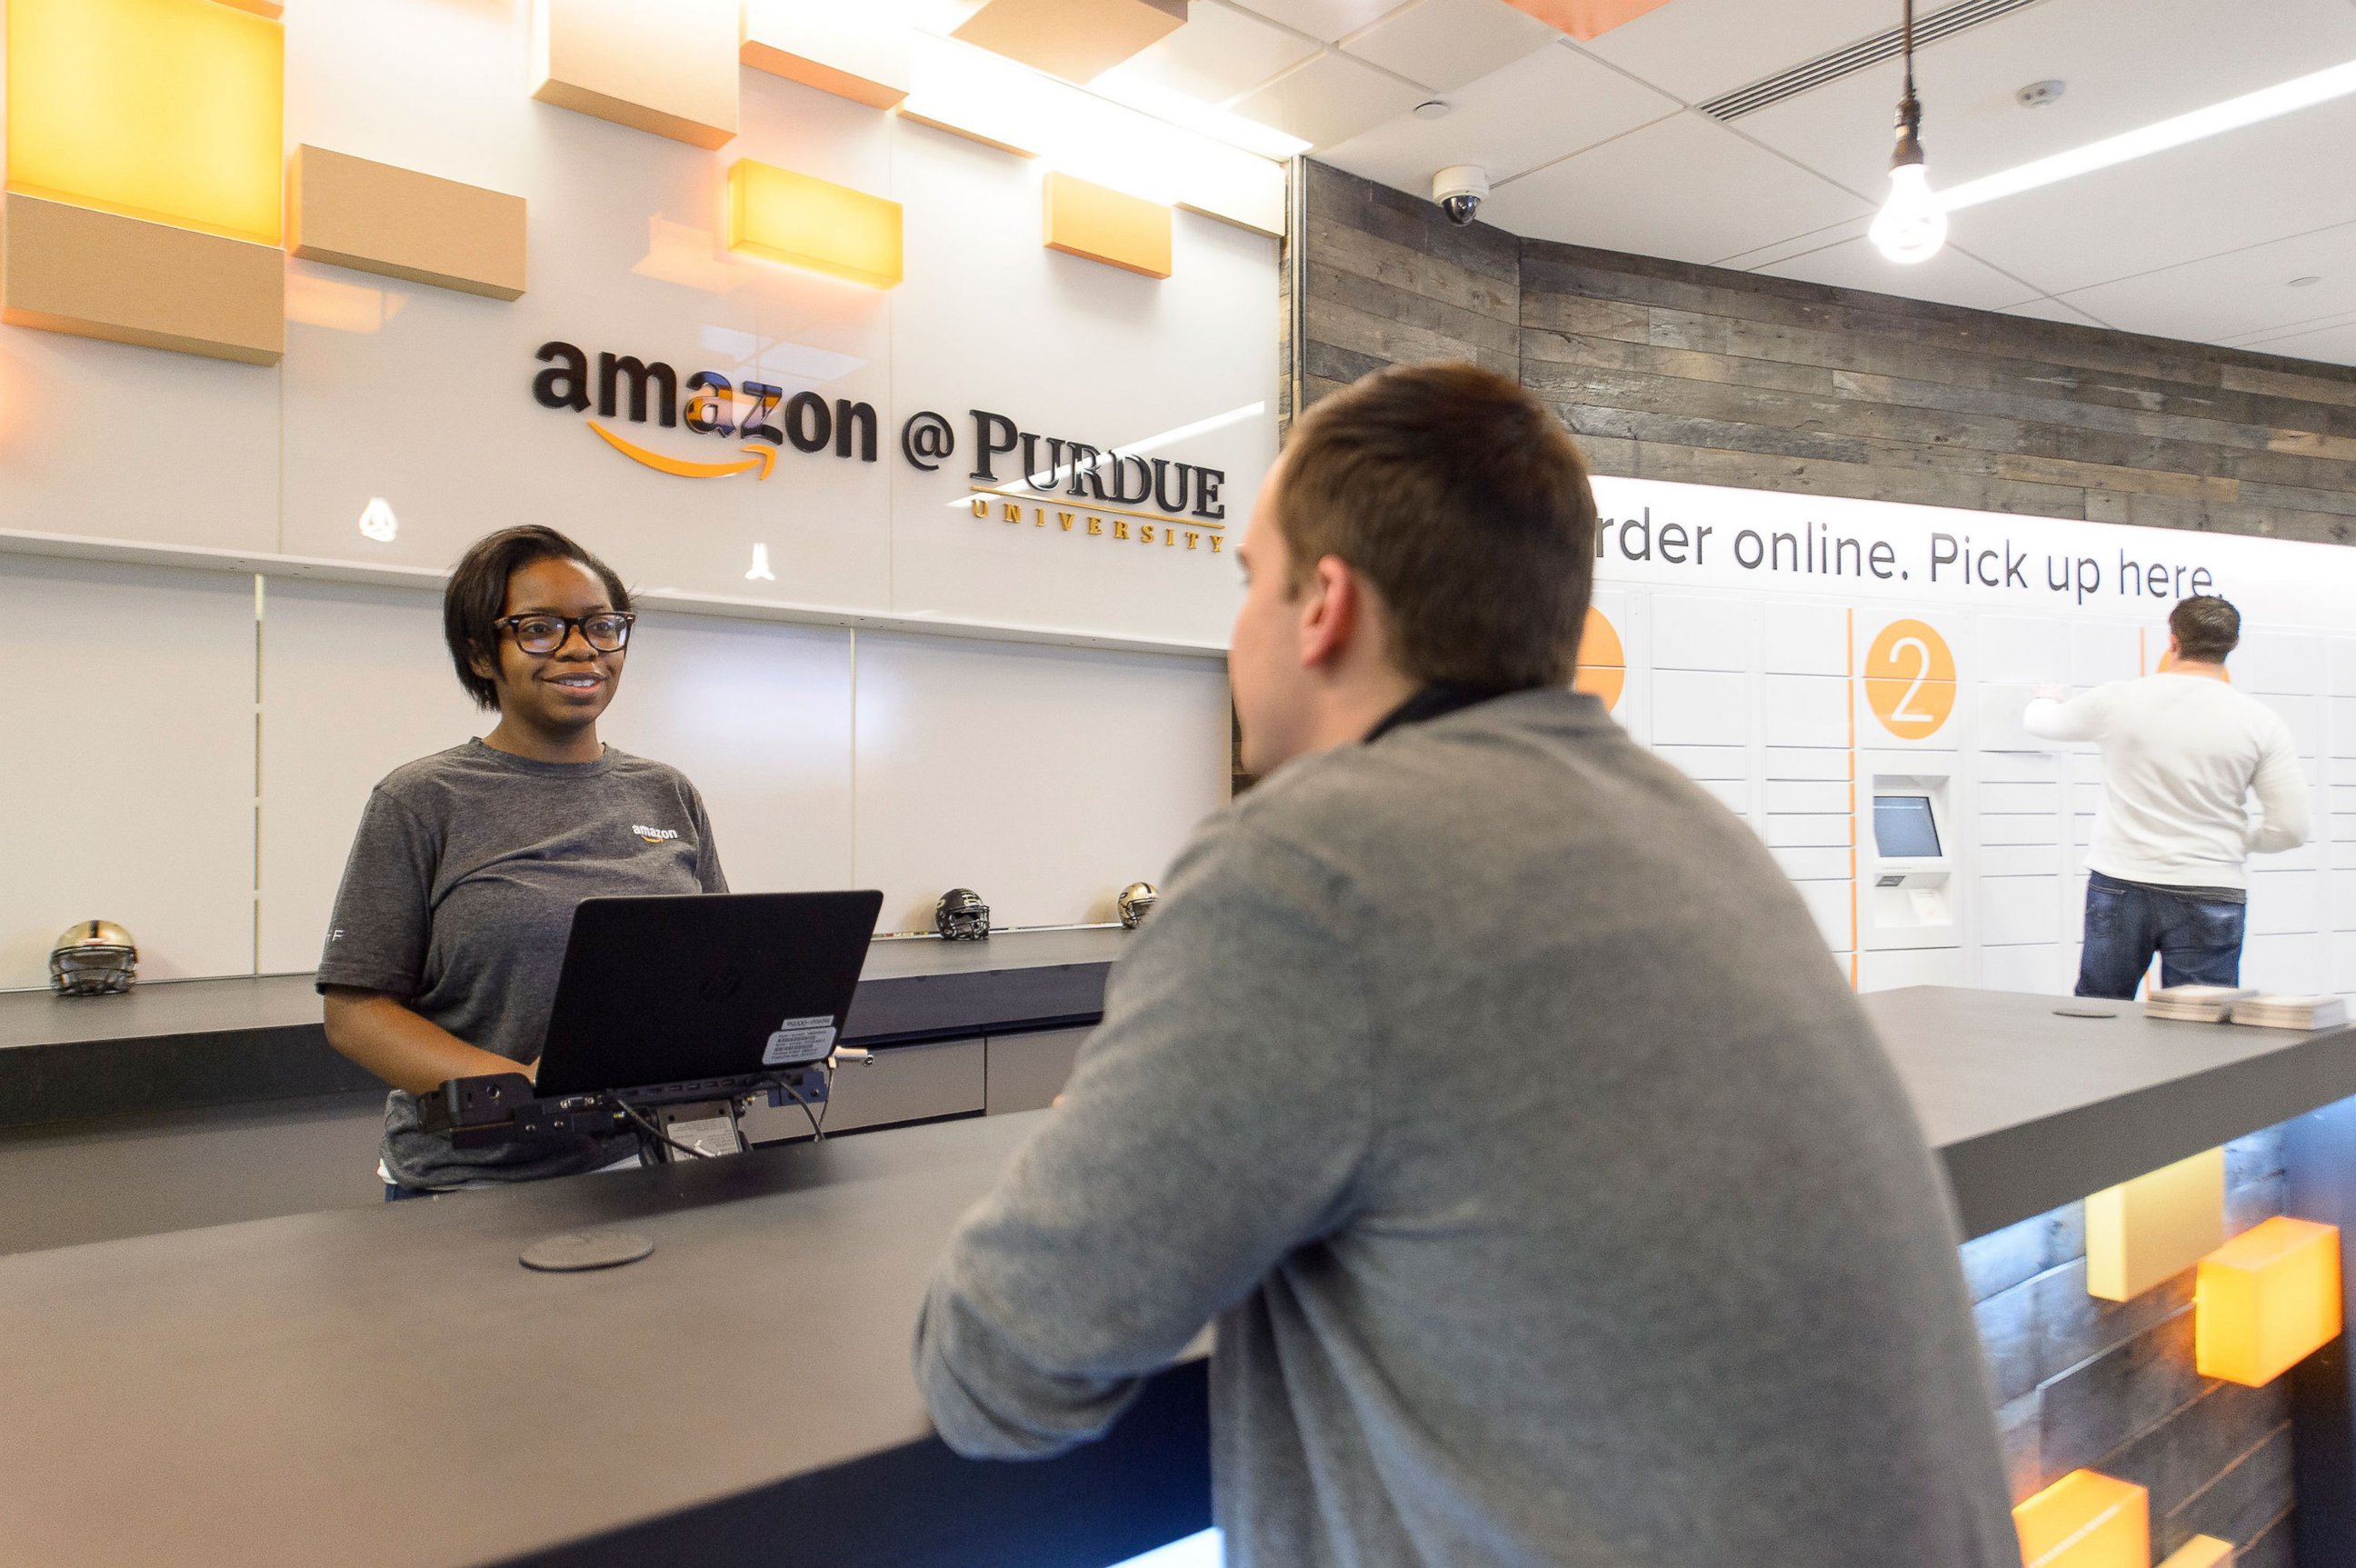 PHOTO: Amazon Student and Amazon Prime members at Purdue University in West Lafayette, Indiana, get Free One-Day Shipping on textbooks and are also eligible for Free One-Day Pickup on over one million items when shipped to the new Amazon@Purdue location.